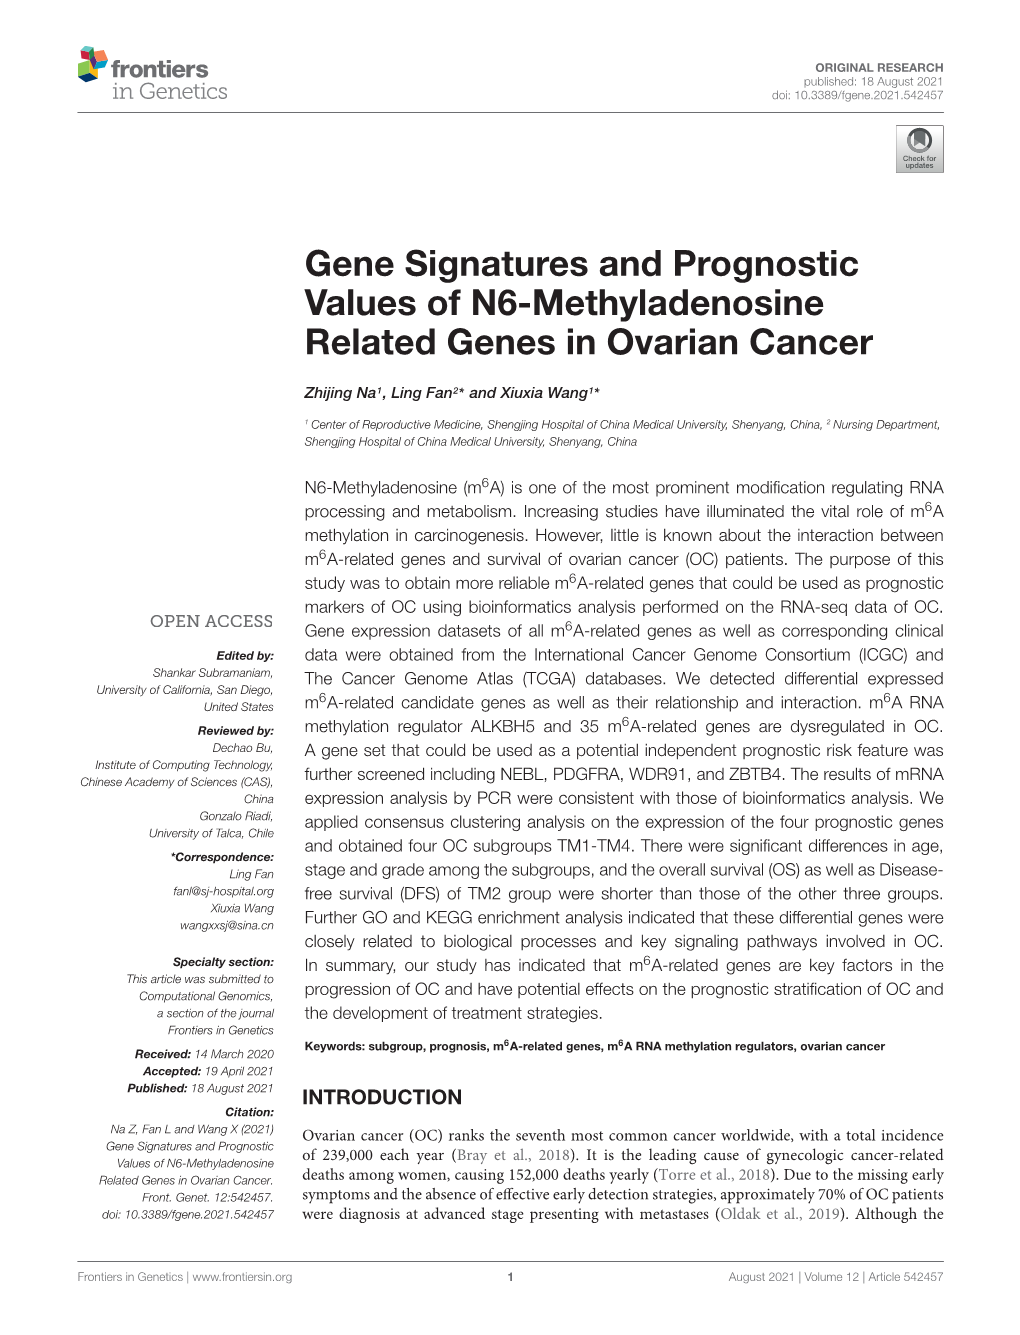 Gene Signatures and Prognostic Values of N6-Methyladenosine Related Genes in Ovarian Cancer